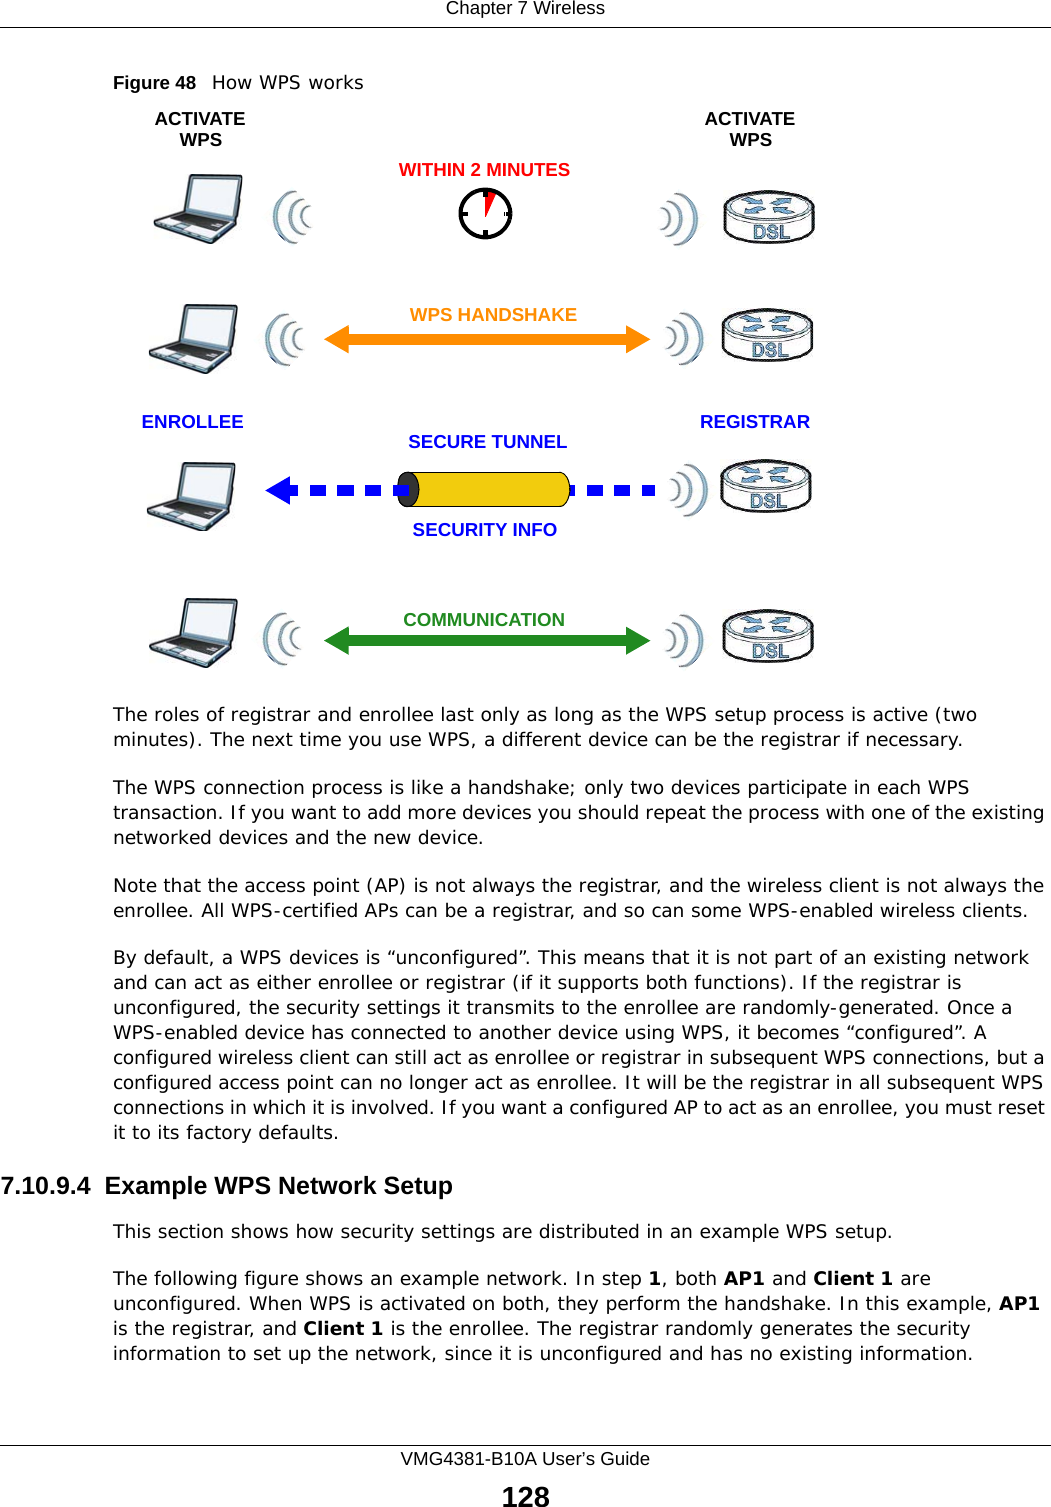 Chapter 7 WirelessVMG4381-B10A User’s Guide128Figure 48   How WPS worksThe roles of registrar and enrollee last only as long as the WPS setup process is active (two minutes). The next time you use WPS, a different device can be the registrar if necessary.The WPS connection process is like a handshake; only two devices participate in each WPS transaction. If you want to add more devices you should repeat the process with one of the existing networked devices and the new device.Note that the access point (AP) is not always the registrar, and the wireless client is not always the enrollee. All WPS-certified APs can be a registrar, and so can some WPS-enabled wireless clients.By default, a WPS devices is “unconfigured”. This means that it is not part of an existing network and can act as either enrollee or registrar (if it supports both functions). If the registrar is unconfigured, the security settings it transmits to the enrollee are randomly-generated. Once a WPS-enabled device has connected to another device using WPS, it becomes “configured”. A configured wireless client can still act as enrollee or registrar in subsequent WPS connections, but a configured access point can no longer act as enrollee. It will be the registrar in all subsequent WPS connections in which it is involved. If you want a configured AP to act as an enrollee, you must reset it to its factory defaults.7.10.9.4  Example WPS Network SetupThis section shows how security settings are distributed in an example WPS setup.The following figure shows an example network. In step 1, both AP1 and Client 1 are unconfigured. When WPS is activated on both, they perform the handshake. In this example, AP1 is the registrar, and Client 1 is the enrollee. The registrar randomly generates the security information to set up the network, since it is unconfigured and has no existing information.SECURE TUNNELSECURITY INFOWITHIN 2 MINUTESCOMMUNICATIONACTIVATEWPSACTIVATEWPSWPS HANDSHAKEREGISTRARENROLLEE